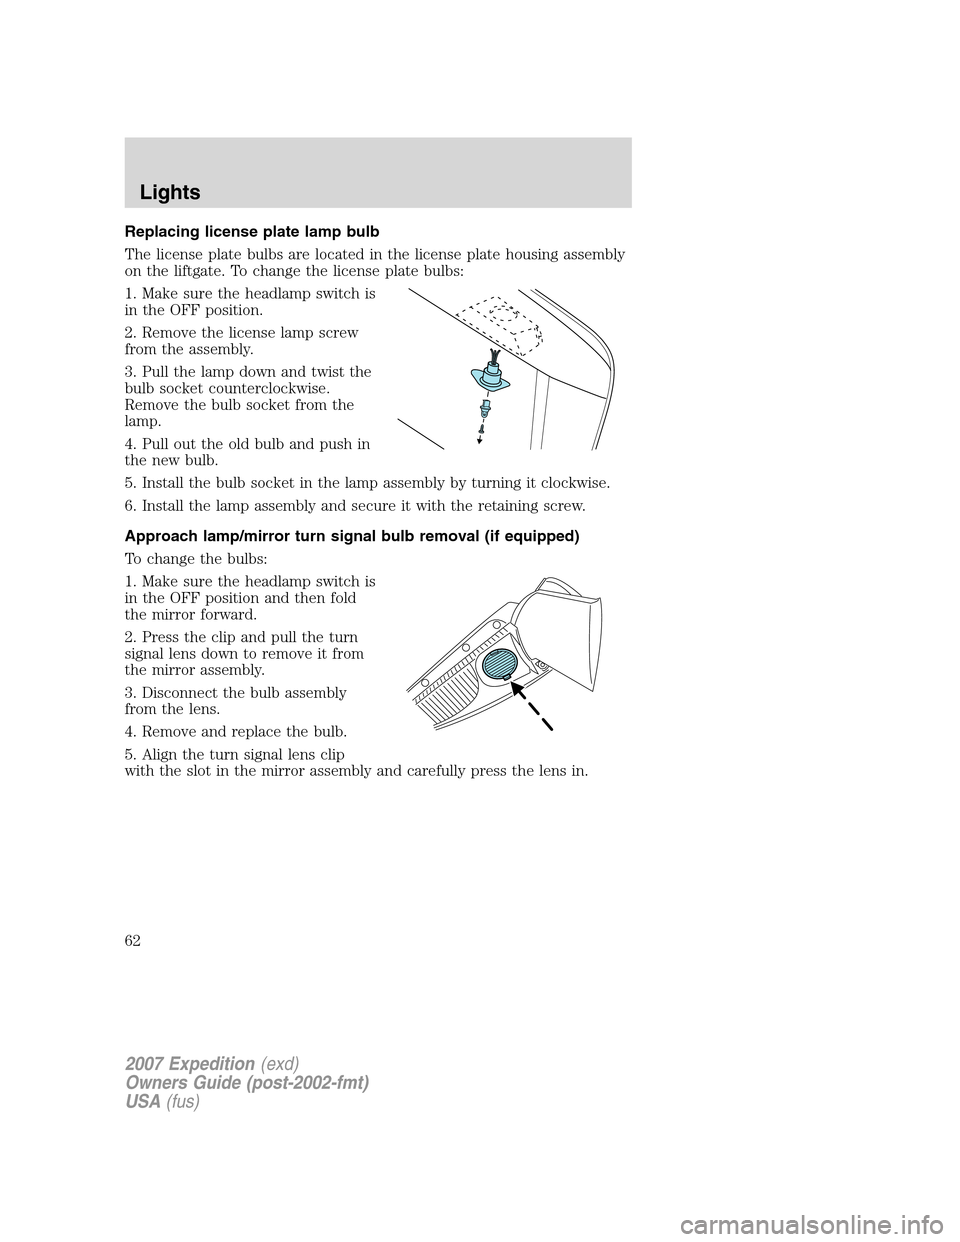 FORD EXPEDITION 2007 3.G Owners Manual Replacing license plate lamp bulb
The license plate bulbs are located in the license plate housing assembly
on the liftgate. To change the license plate bulbs:
1. Make sure the headlamp switch is
in t